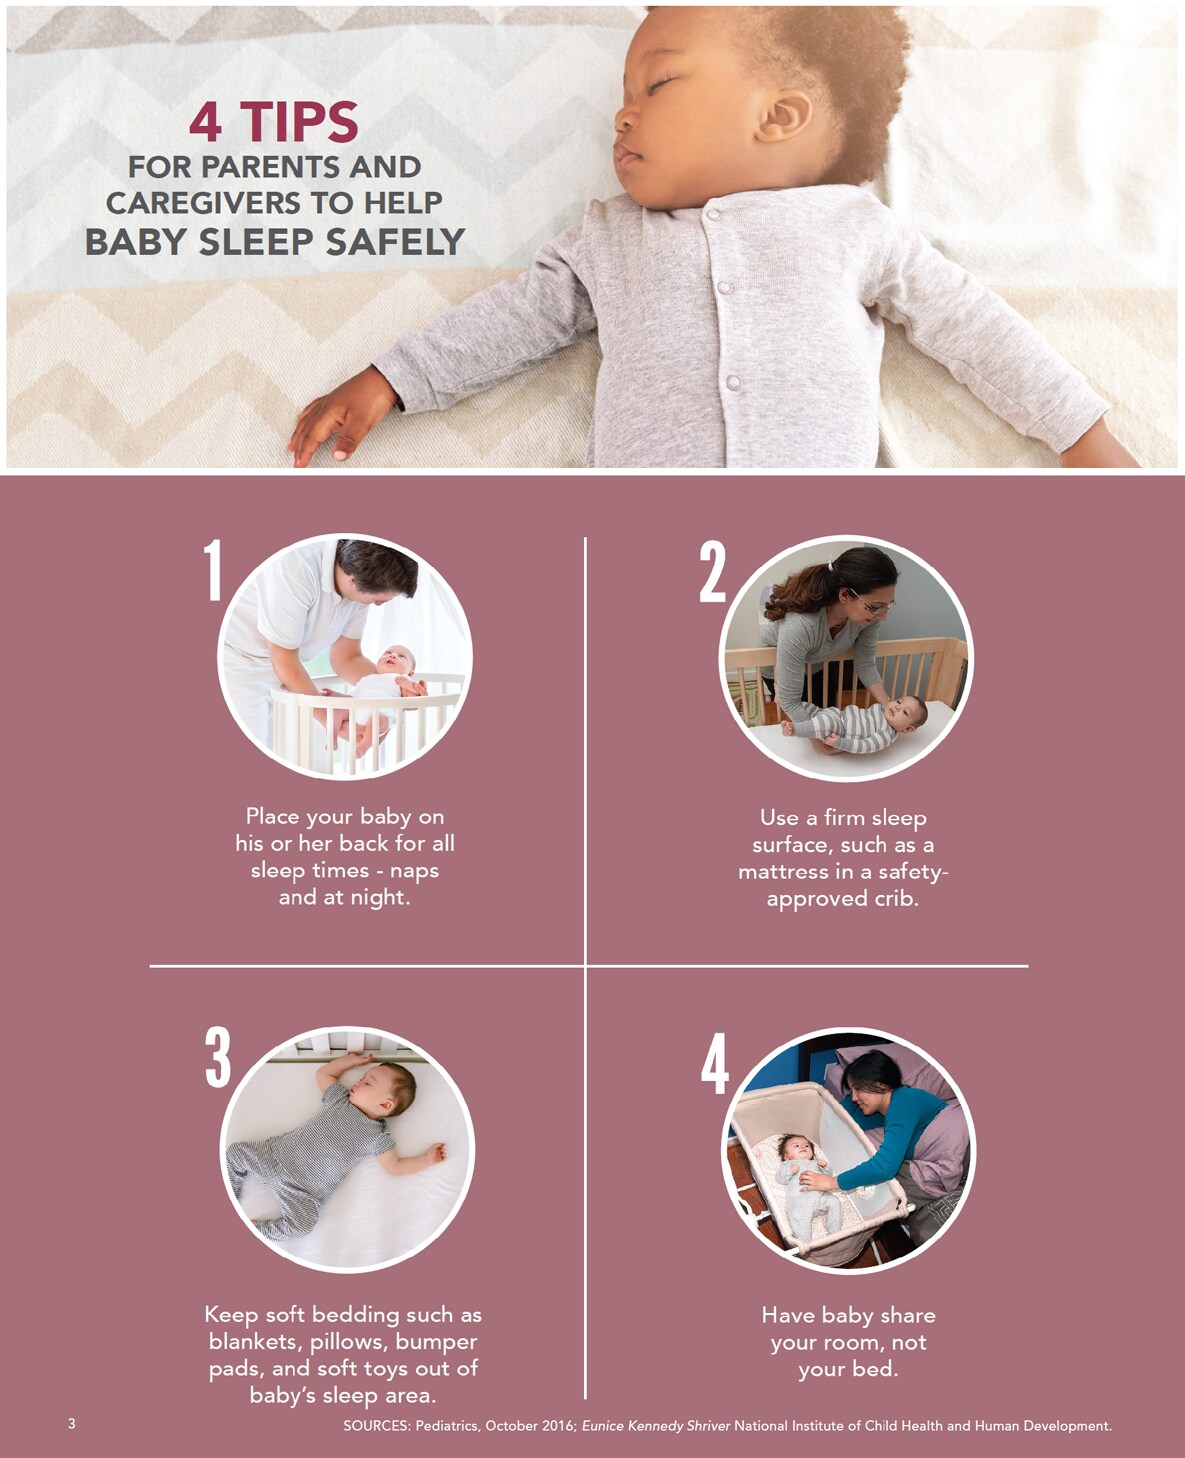 Graphic: 4 Tips for Parents and Caregivers to Help Baby Sleep Safely